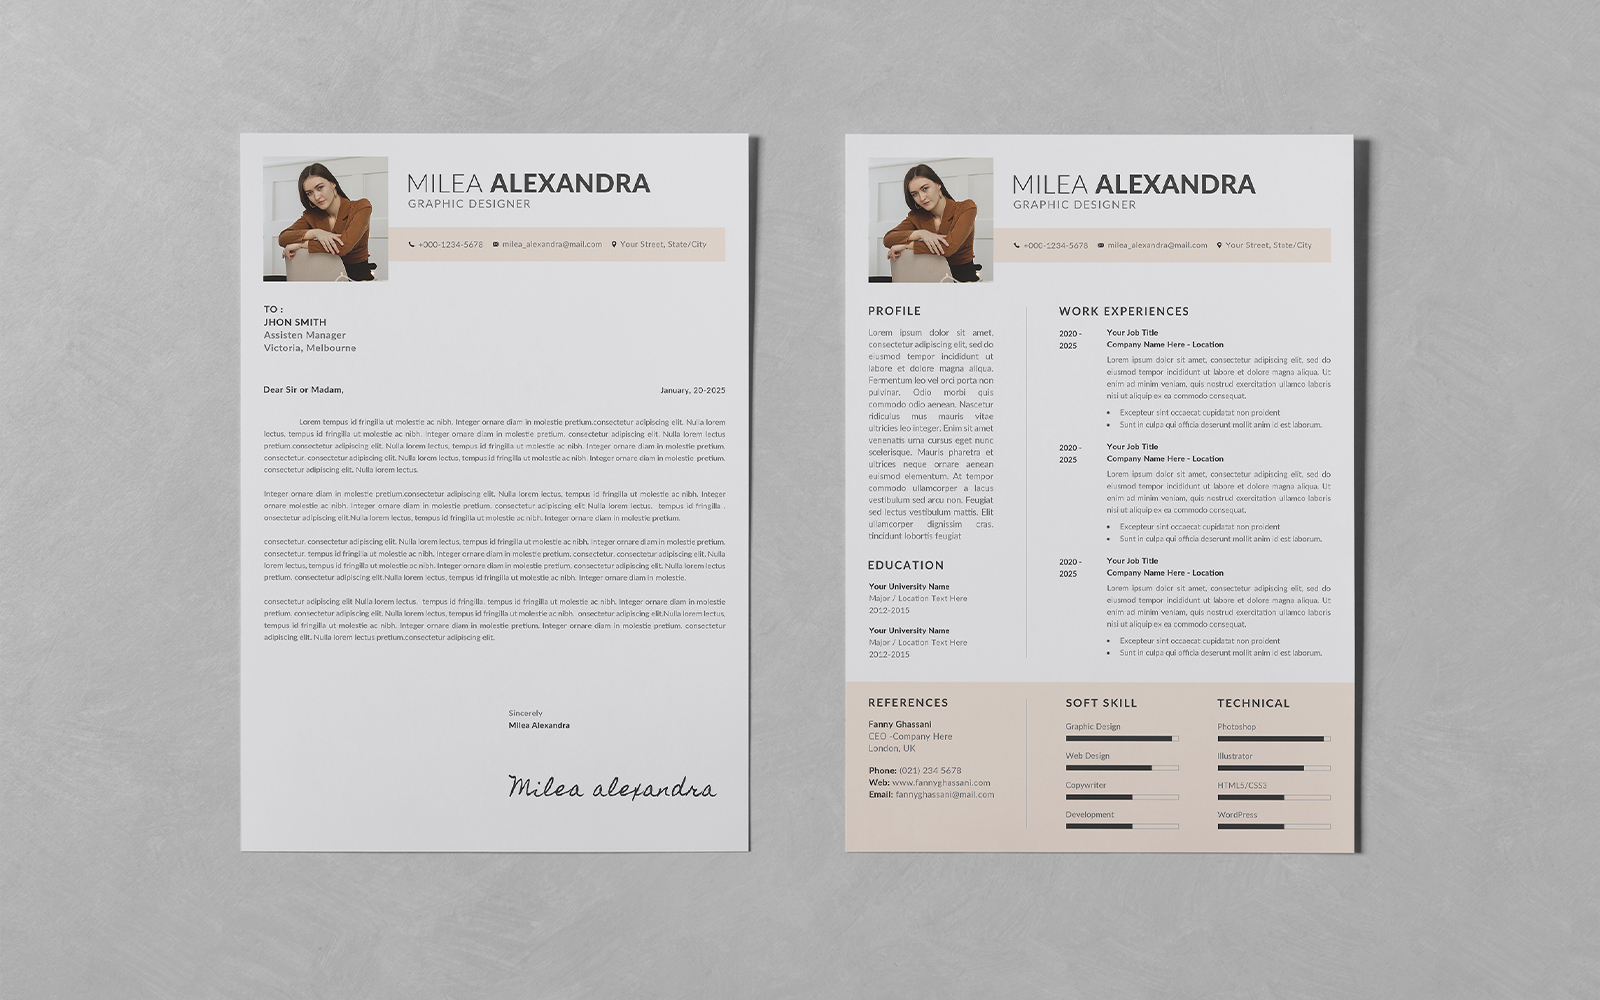 Resume CV and Cover Letter Design PSD Templates